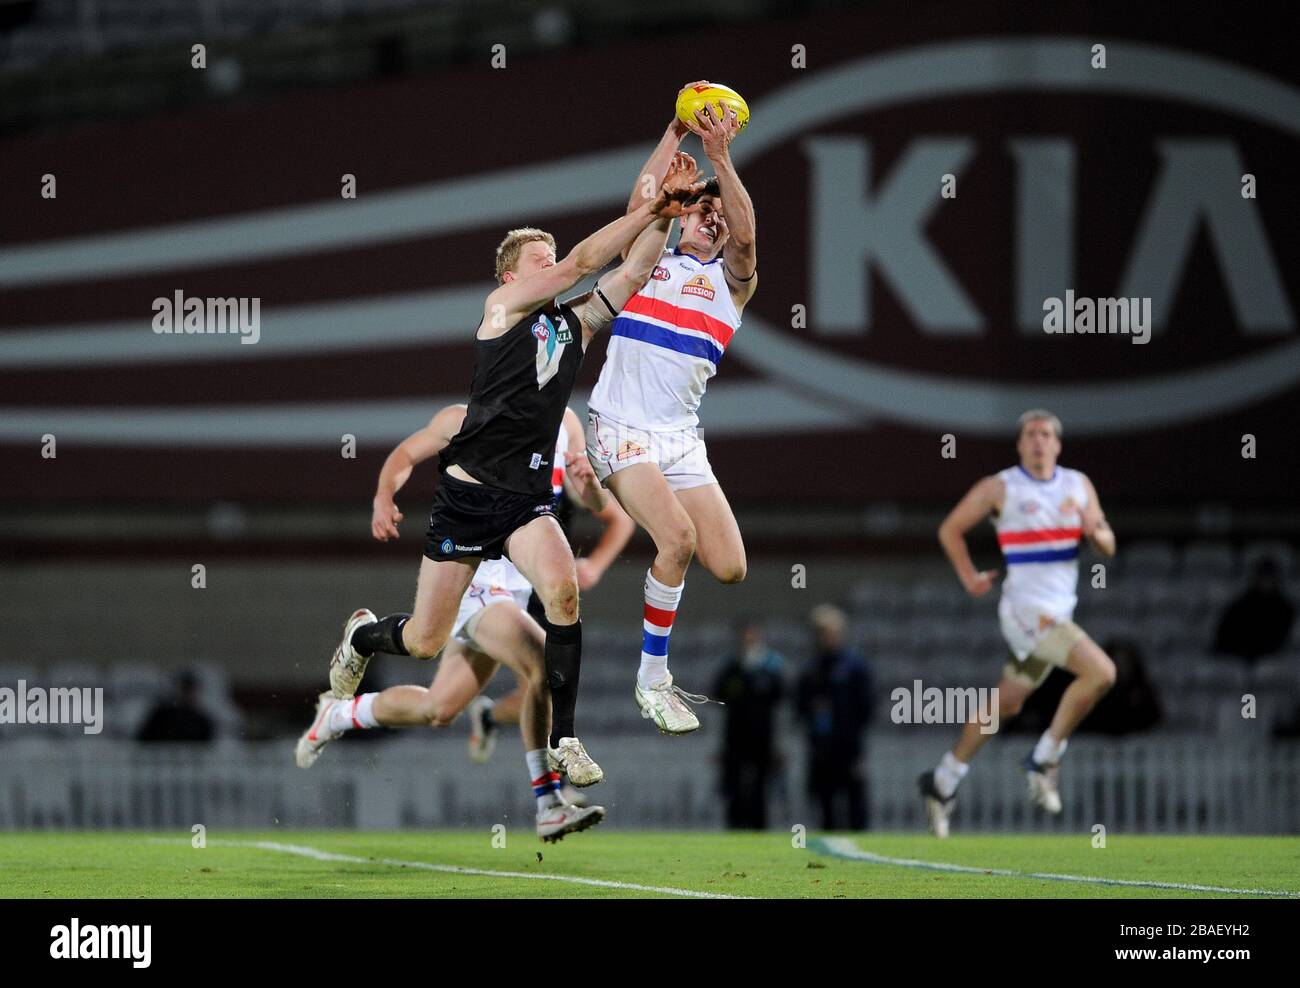 Port Adelaide (black) playing Western Bulldogs (white) in the Challenge Cup at the Kia Oval. Stock Photo